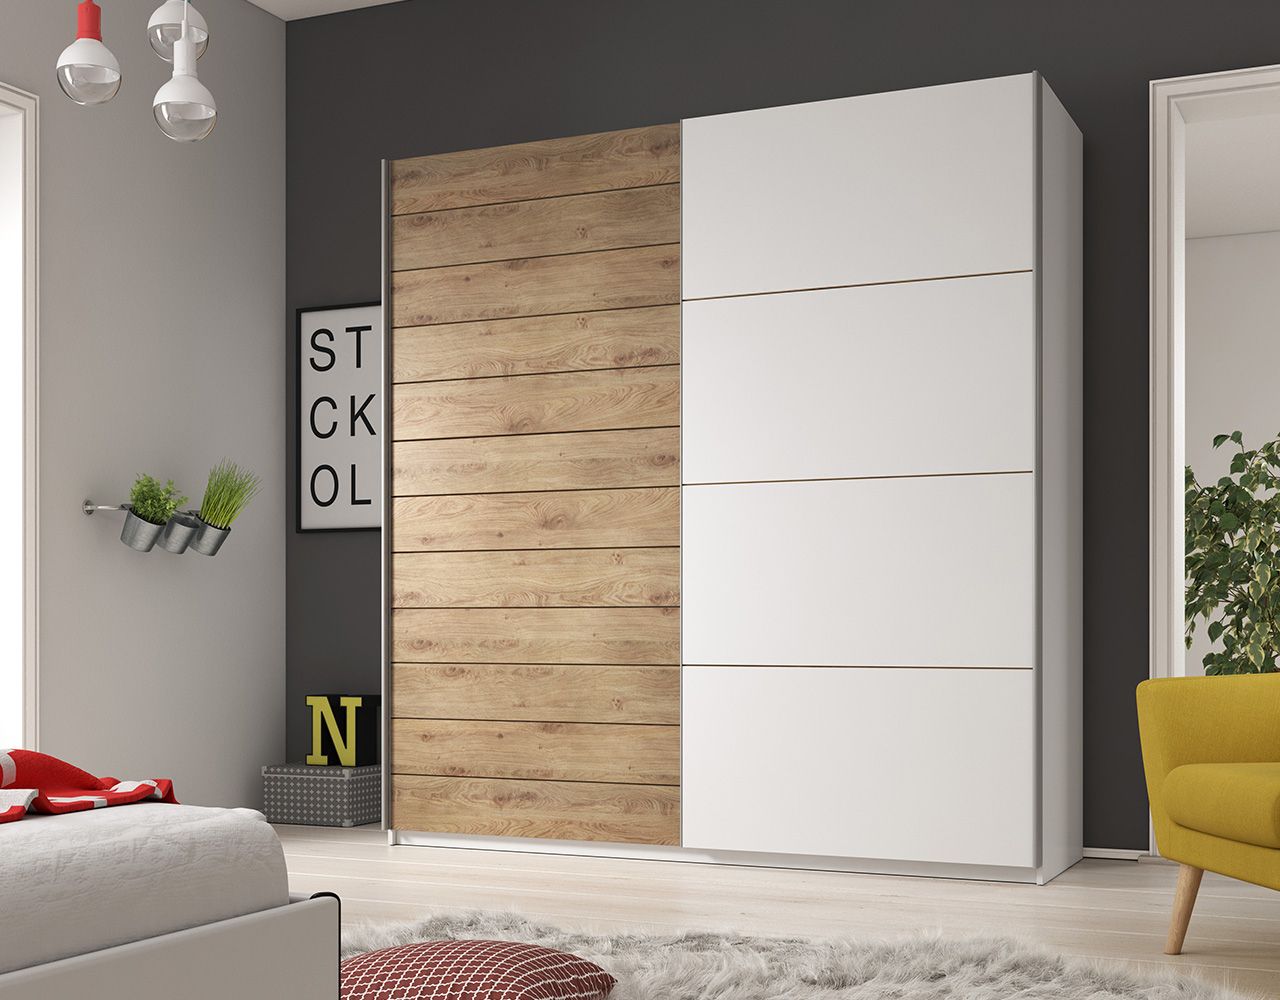 Practical Wardrobe For A Small Apartment Blog Mebline Furniture Regarding Cheap Wardrobes (View 5 of 9)